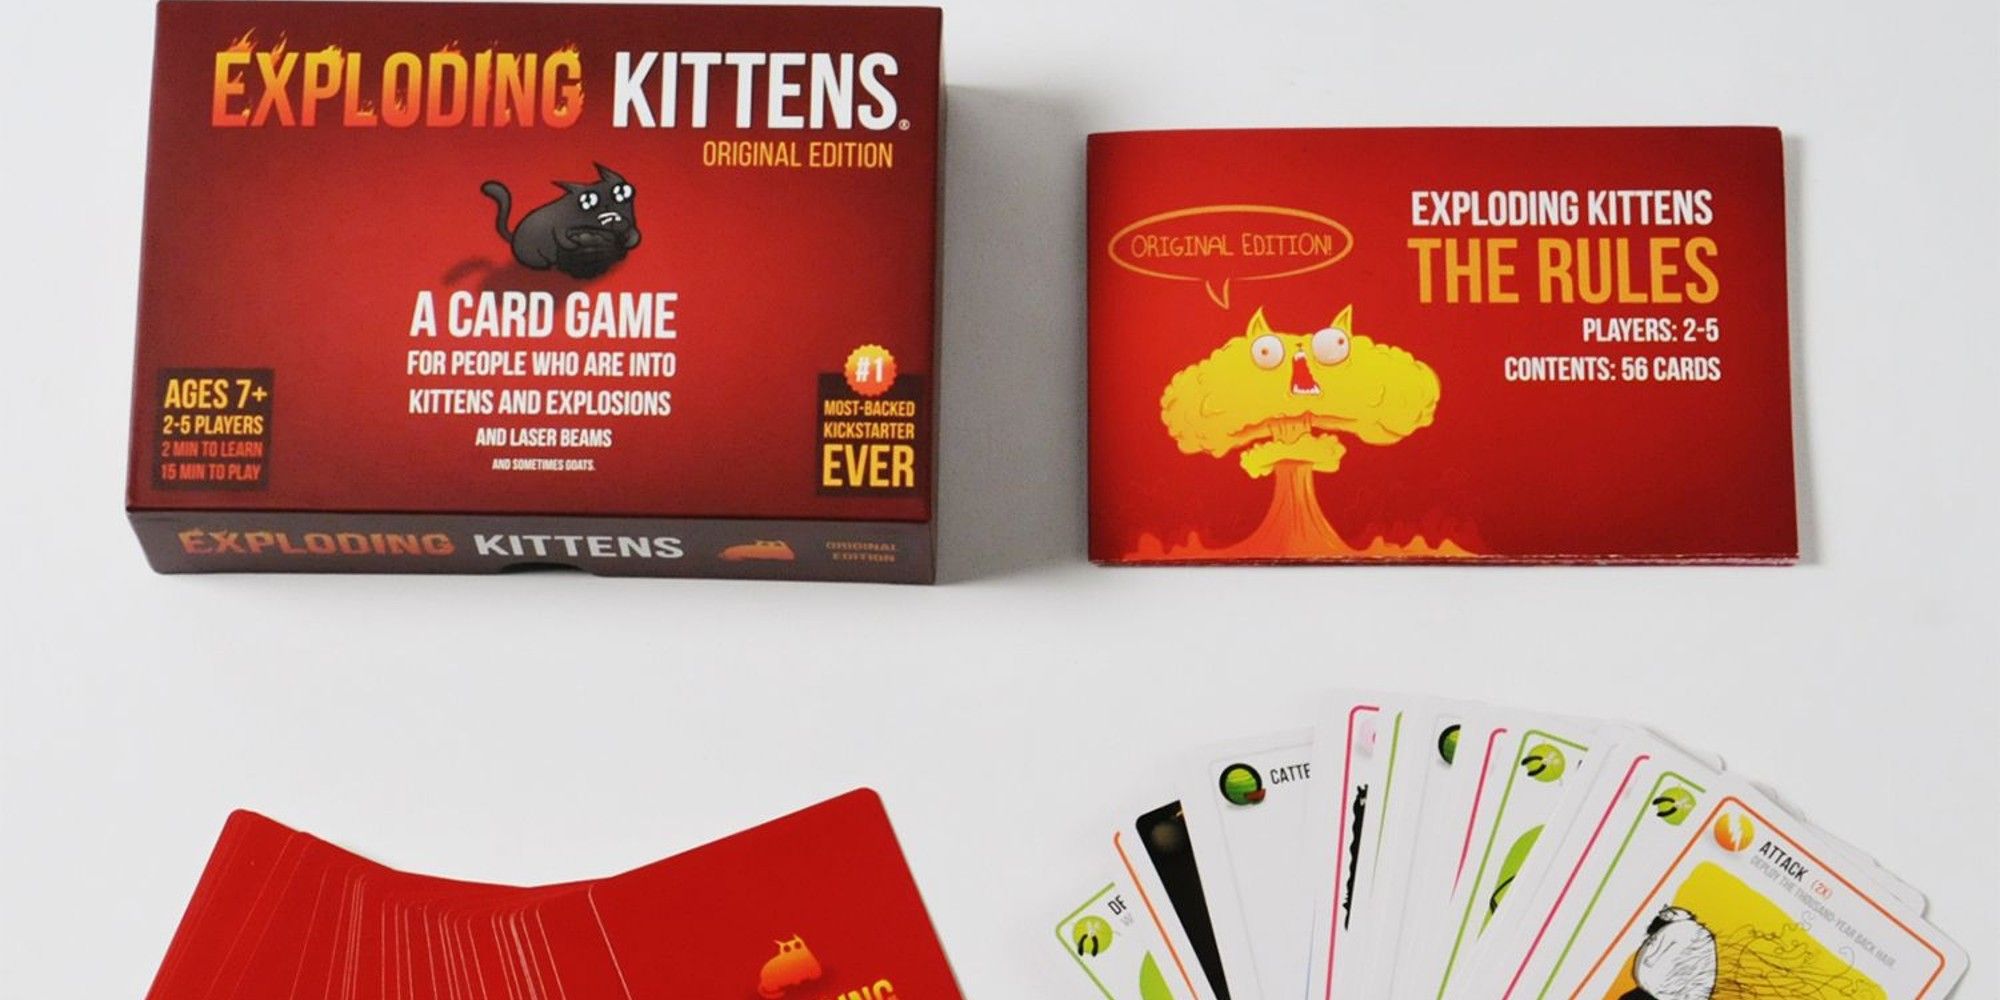 Exploding Kittens Board Game Box and Cards on White Background